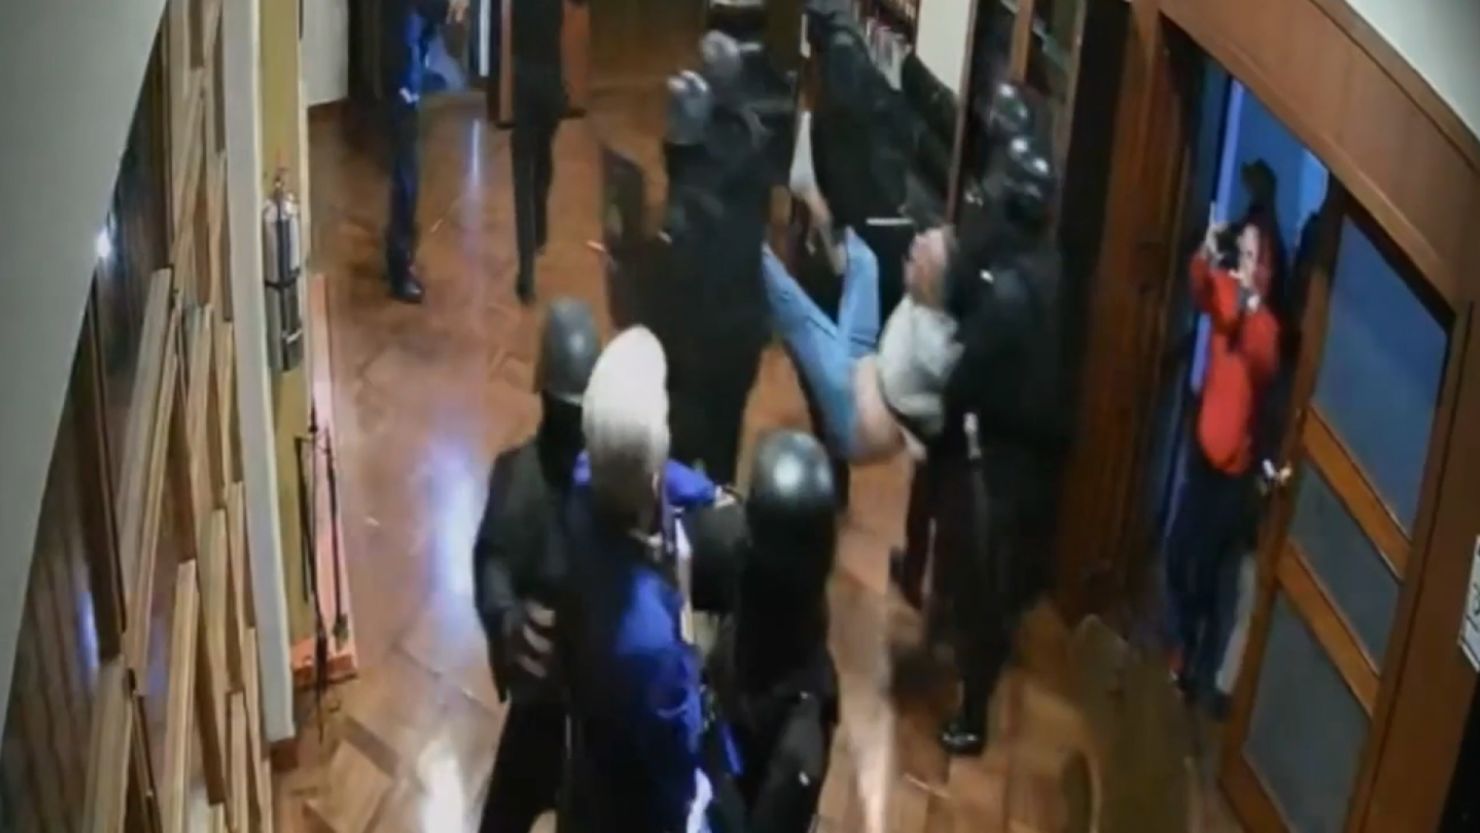 Security camera footage shows Ecuadorian police grappling with Jorge Glas in the Mexican embassy in Quito.